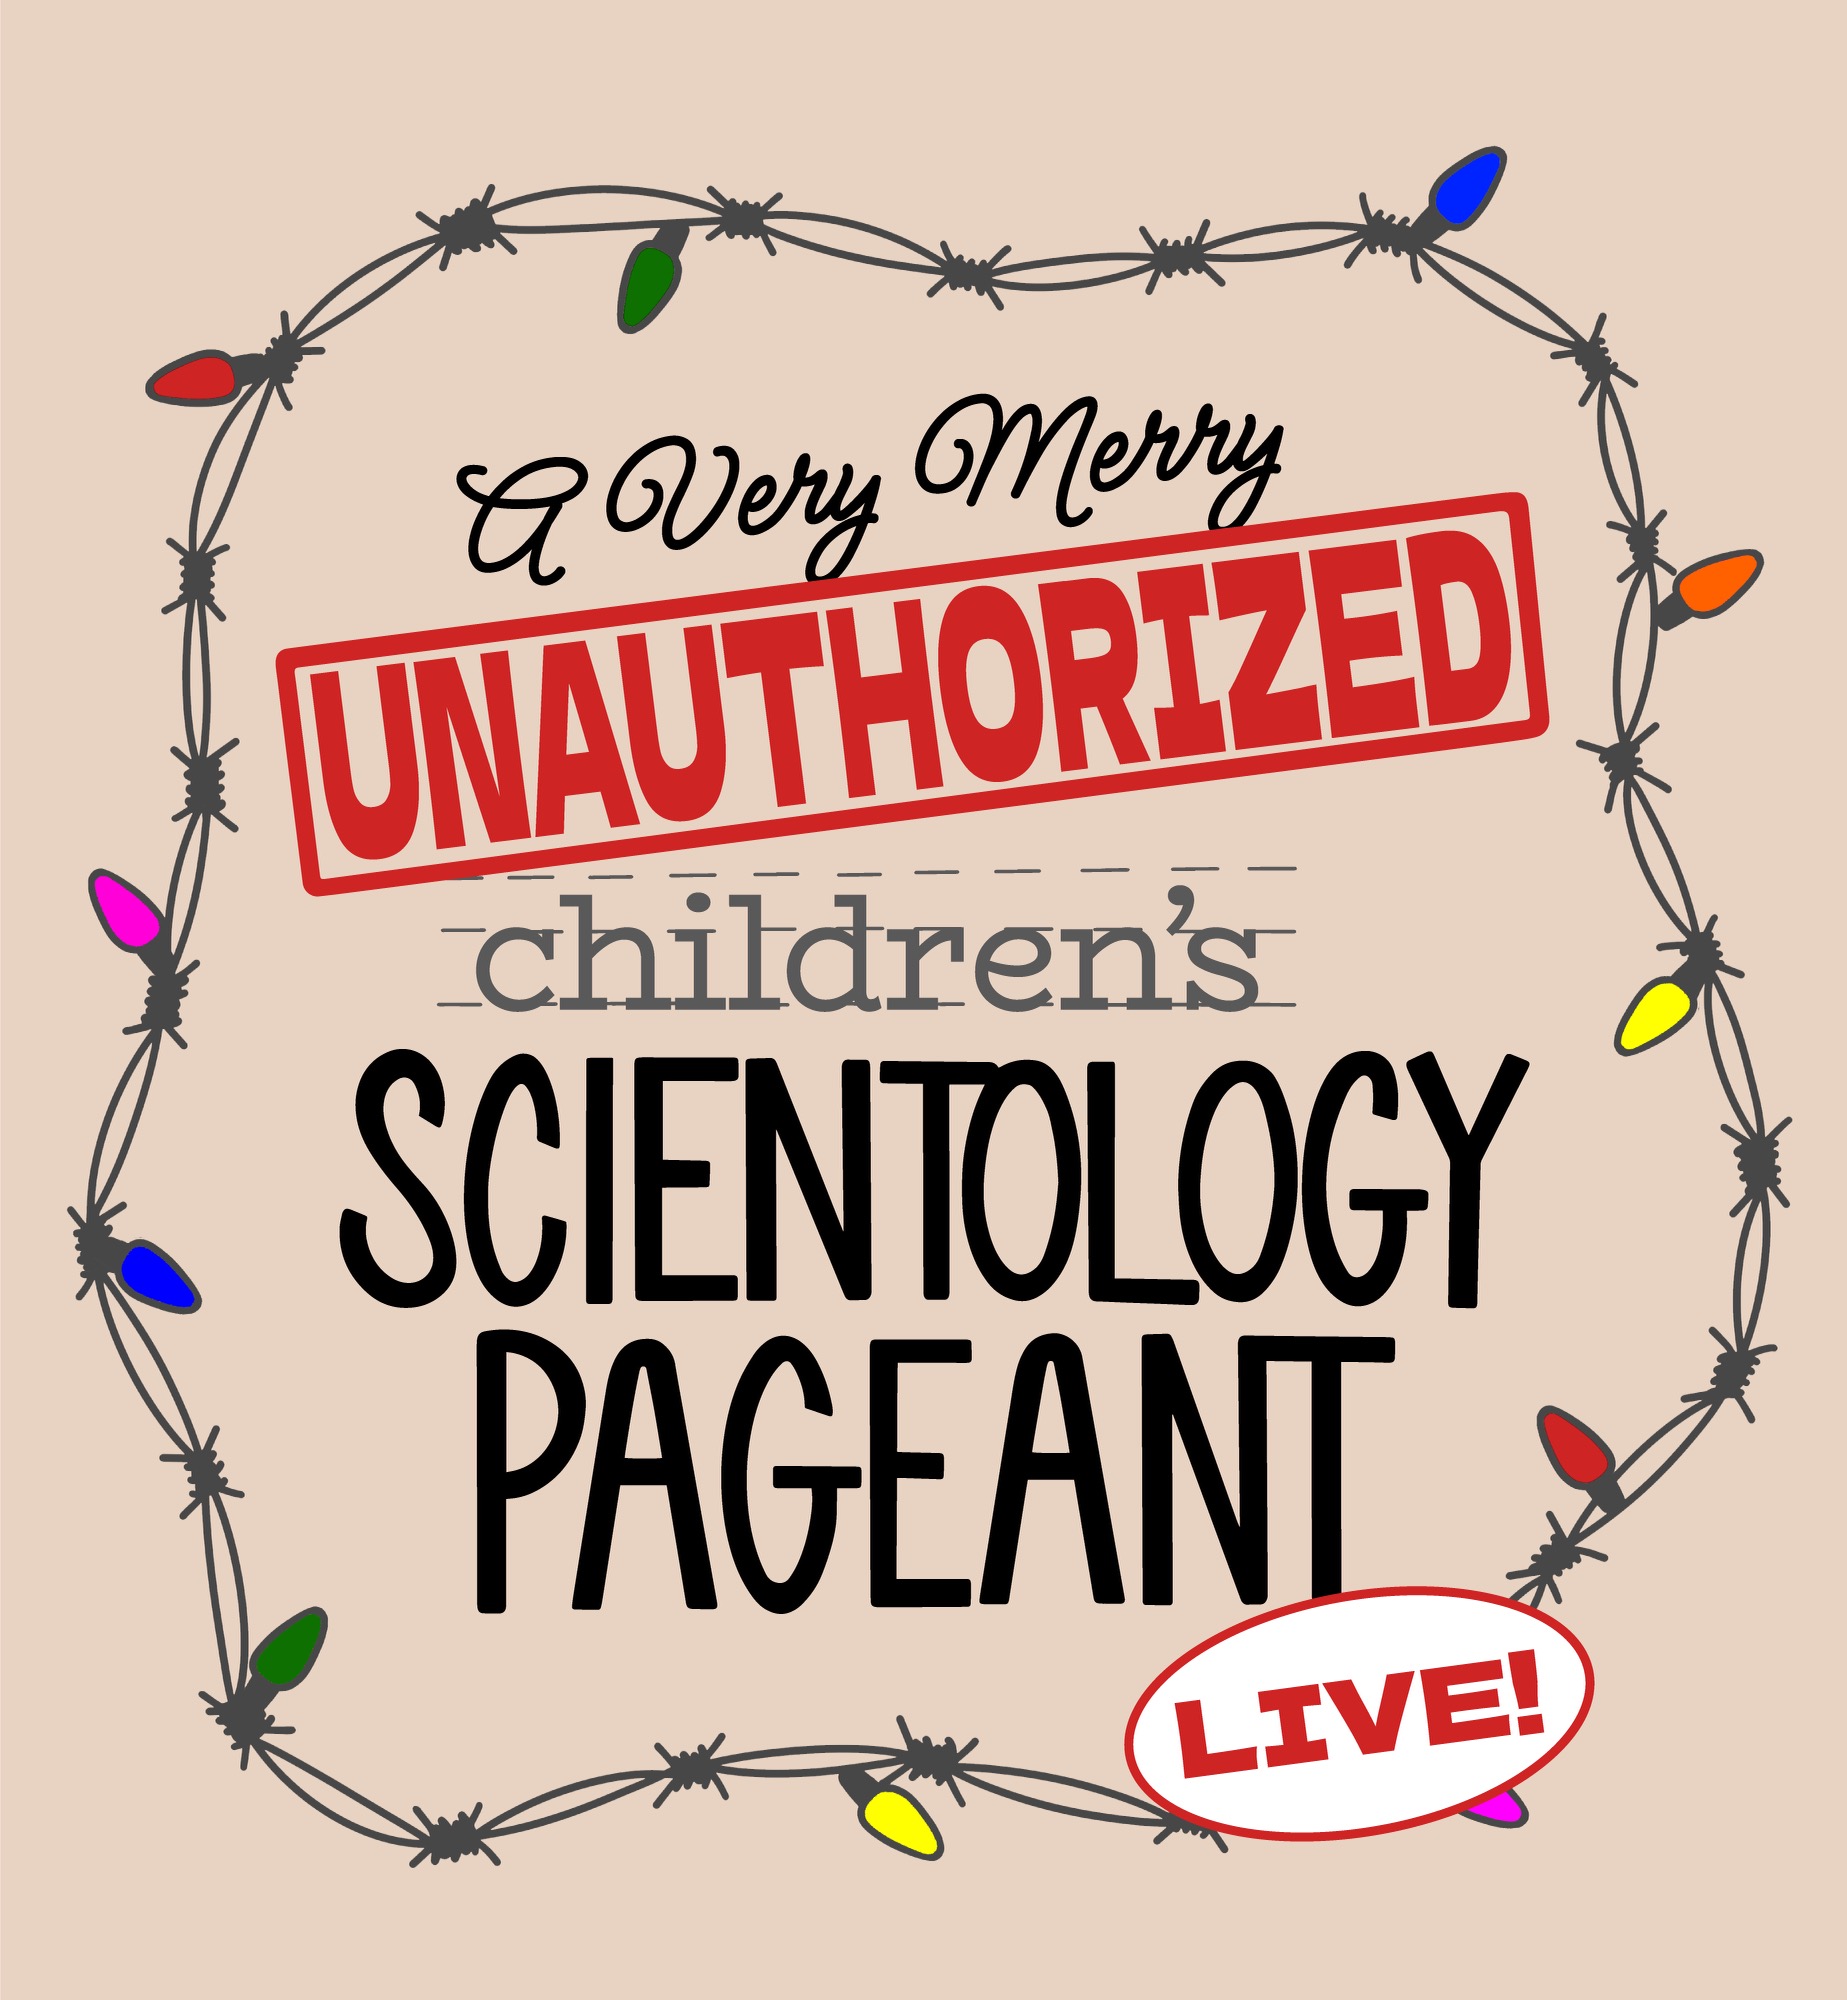 A Very Merry Unauthorized Children's Scientology Pageant - LIVE!